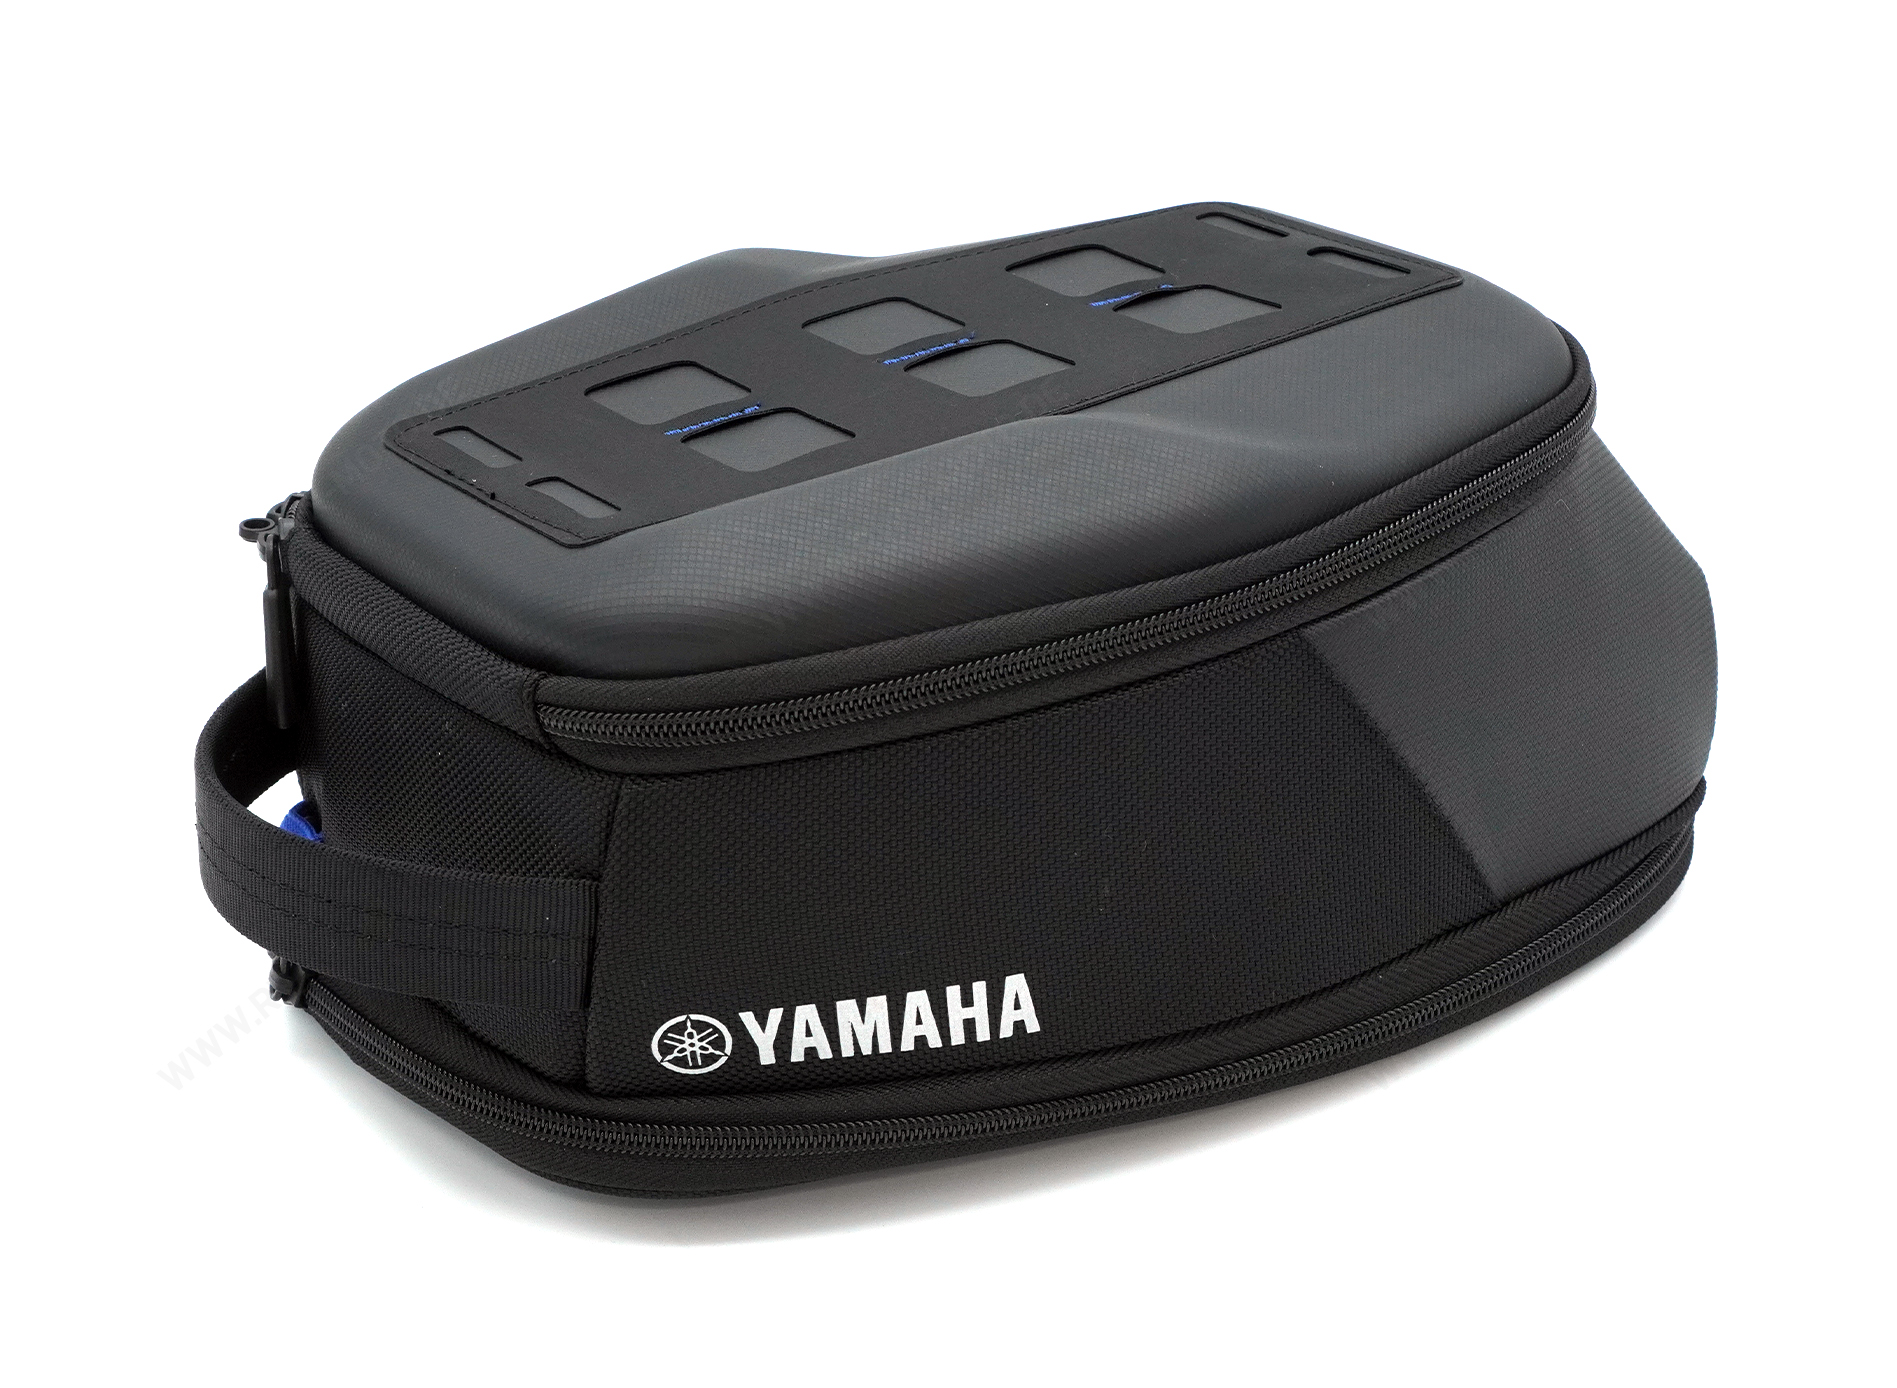 yamaha Ray zr front storage bag - All Vehicles Accessories - 115577340